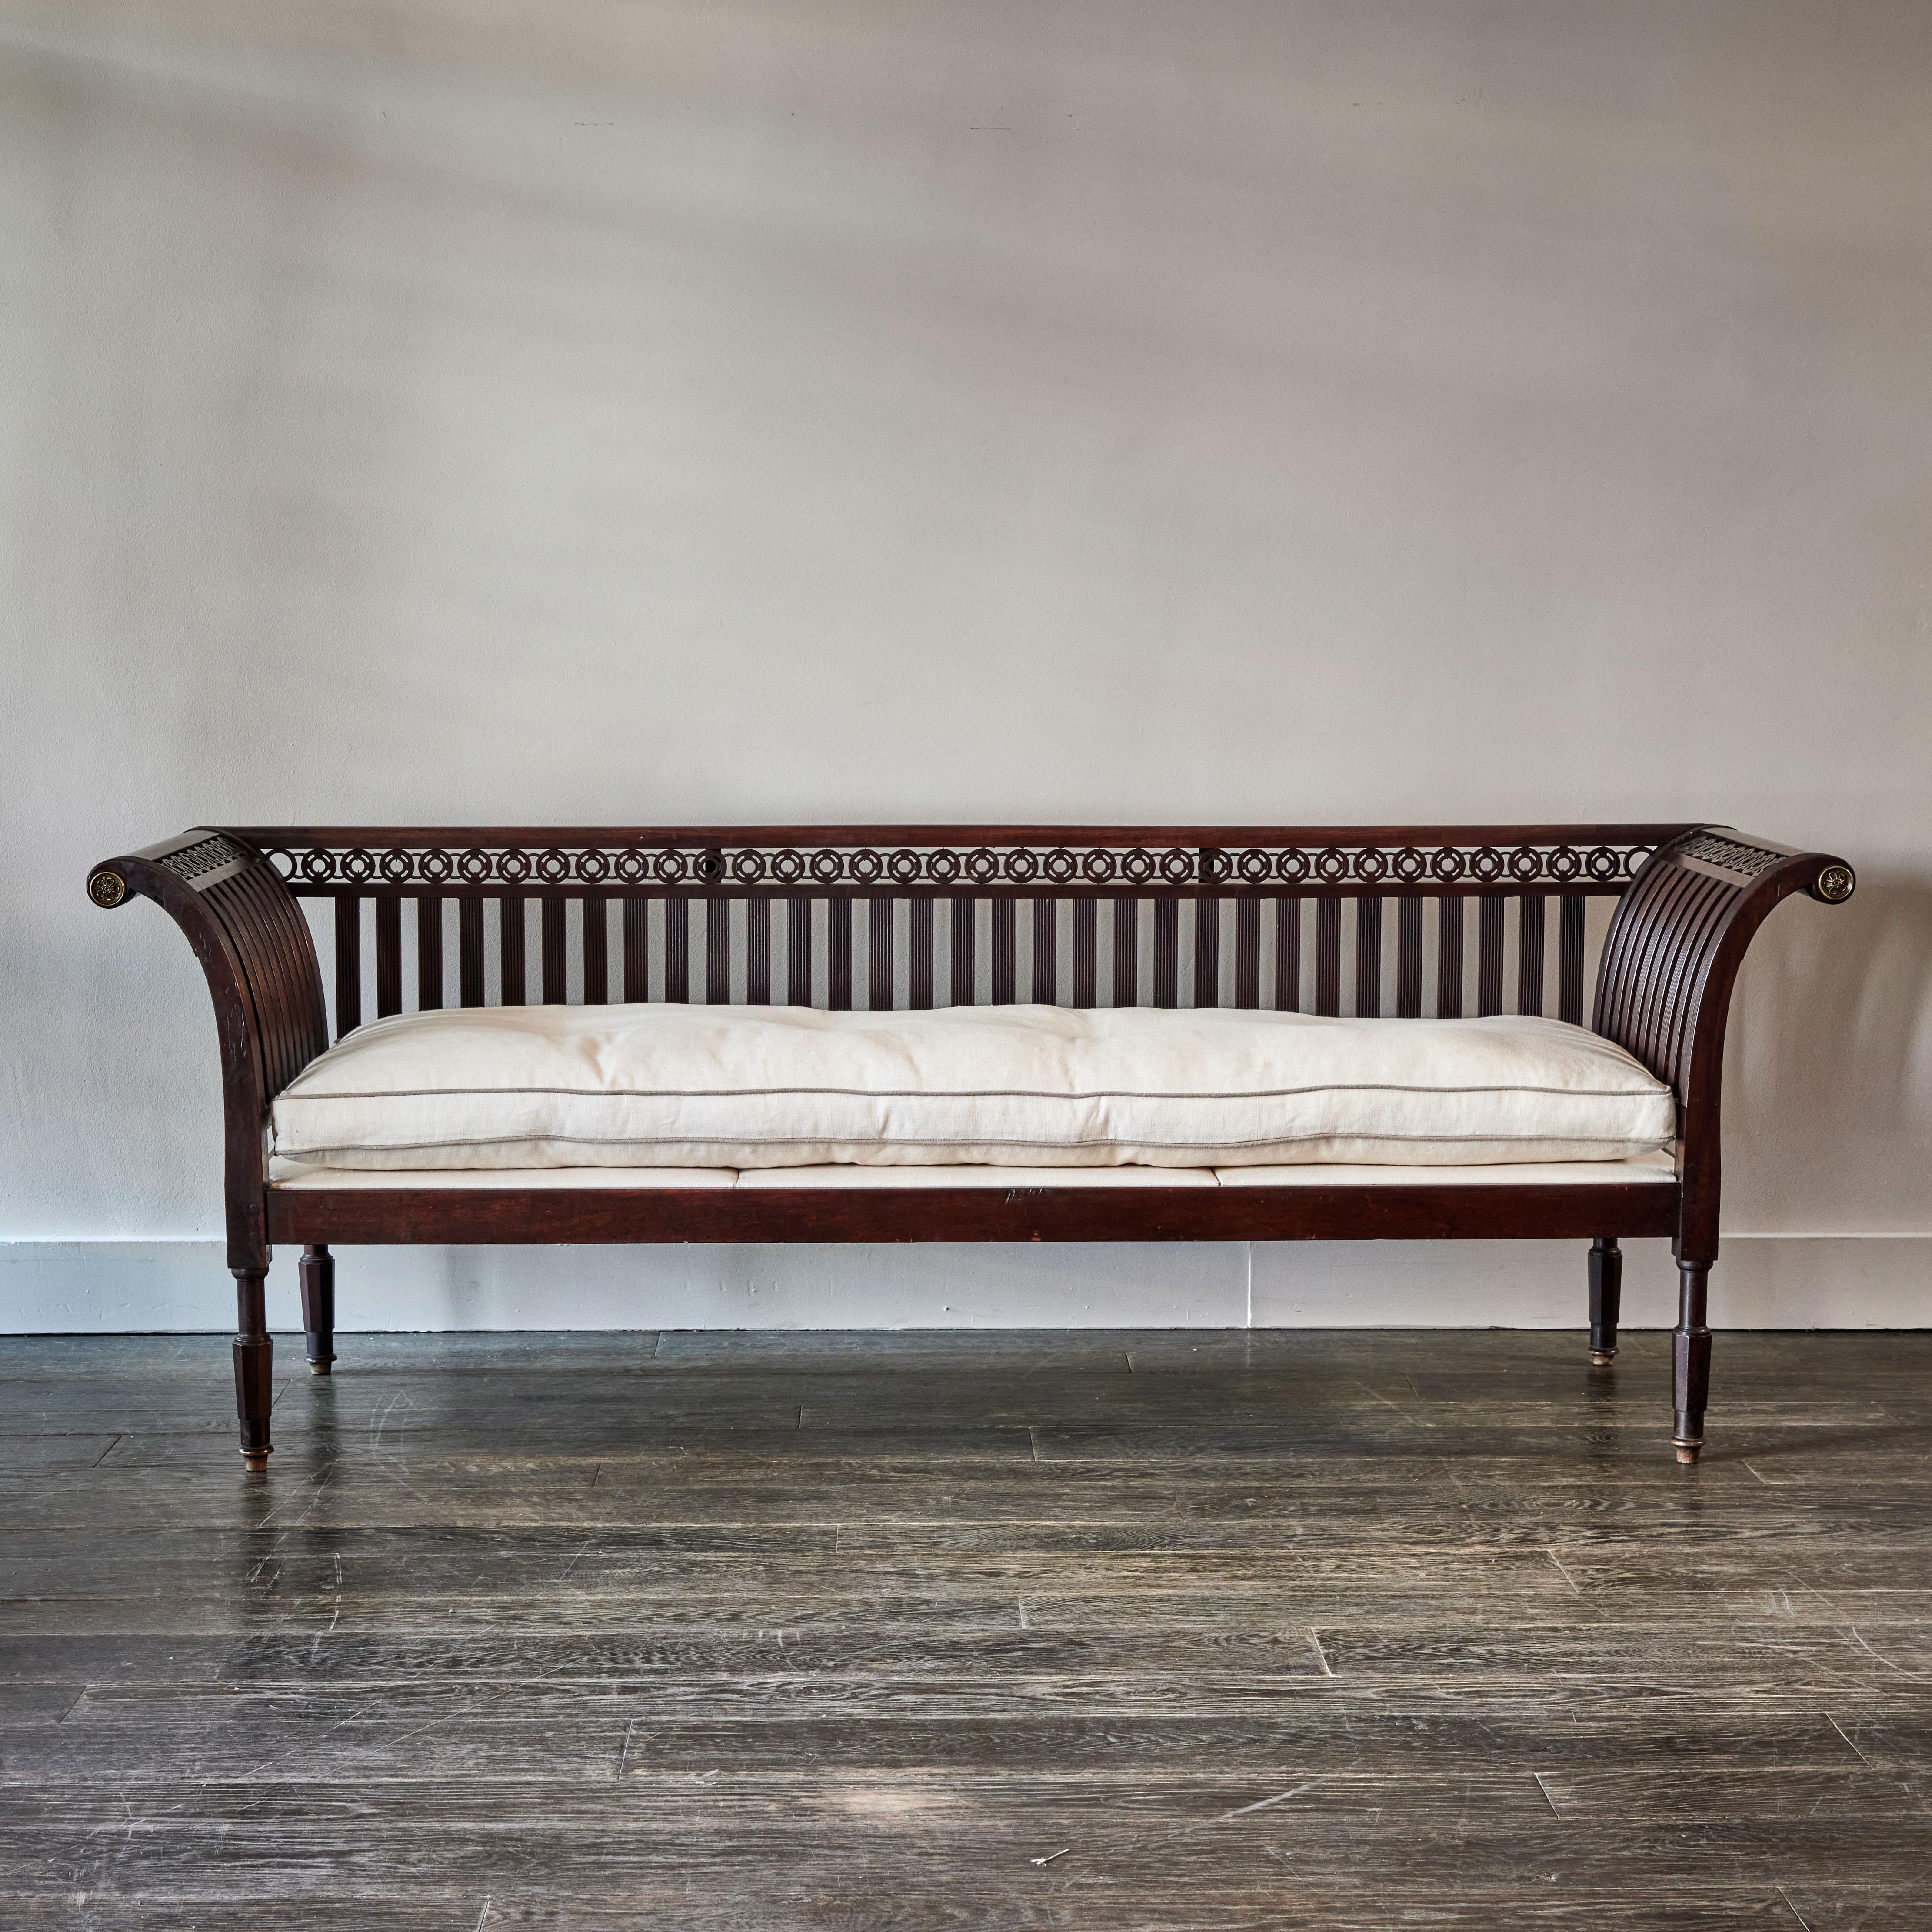 Early 19th-century Empire style wood bench or settee. A wonderful example of Continental Neoclassicism, the piece features a slatted, wonderfully detailed hand-carved wooden back and armrest in a rich coffee hue, and a new, custom tufted linen